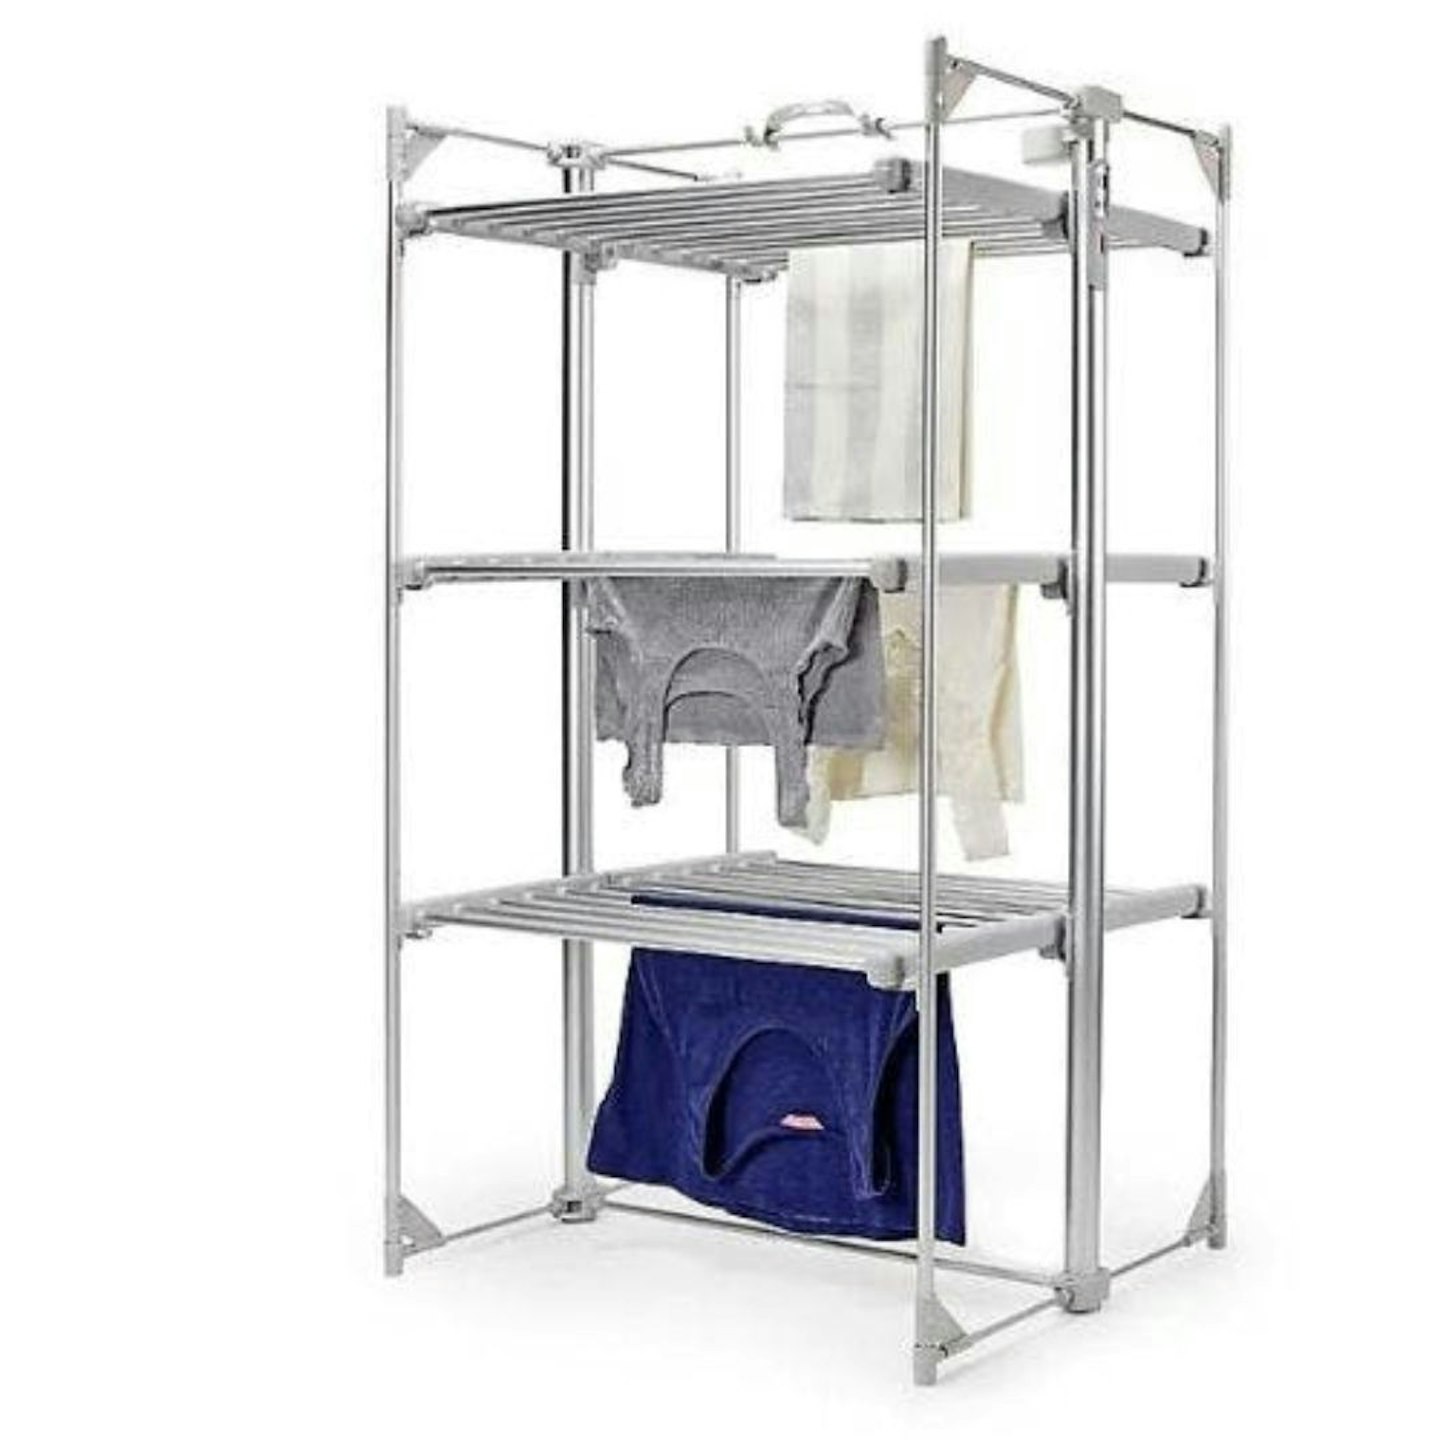 The best heated clothes airers: DrySoon Deluxe 3-Tier Heated Airer